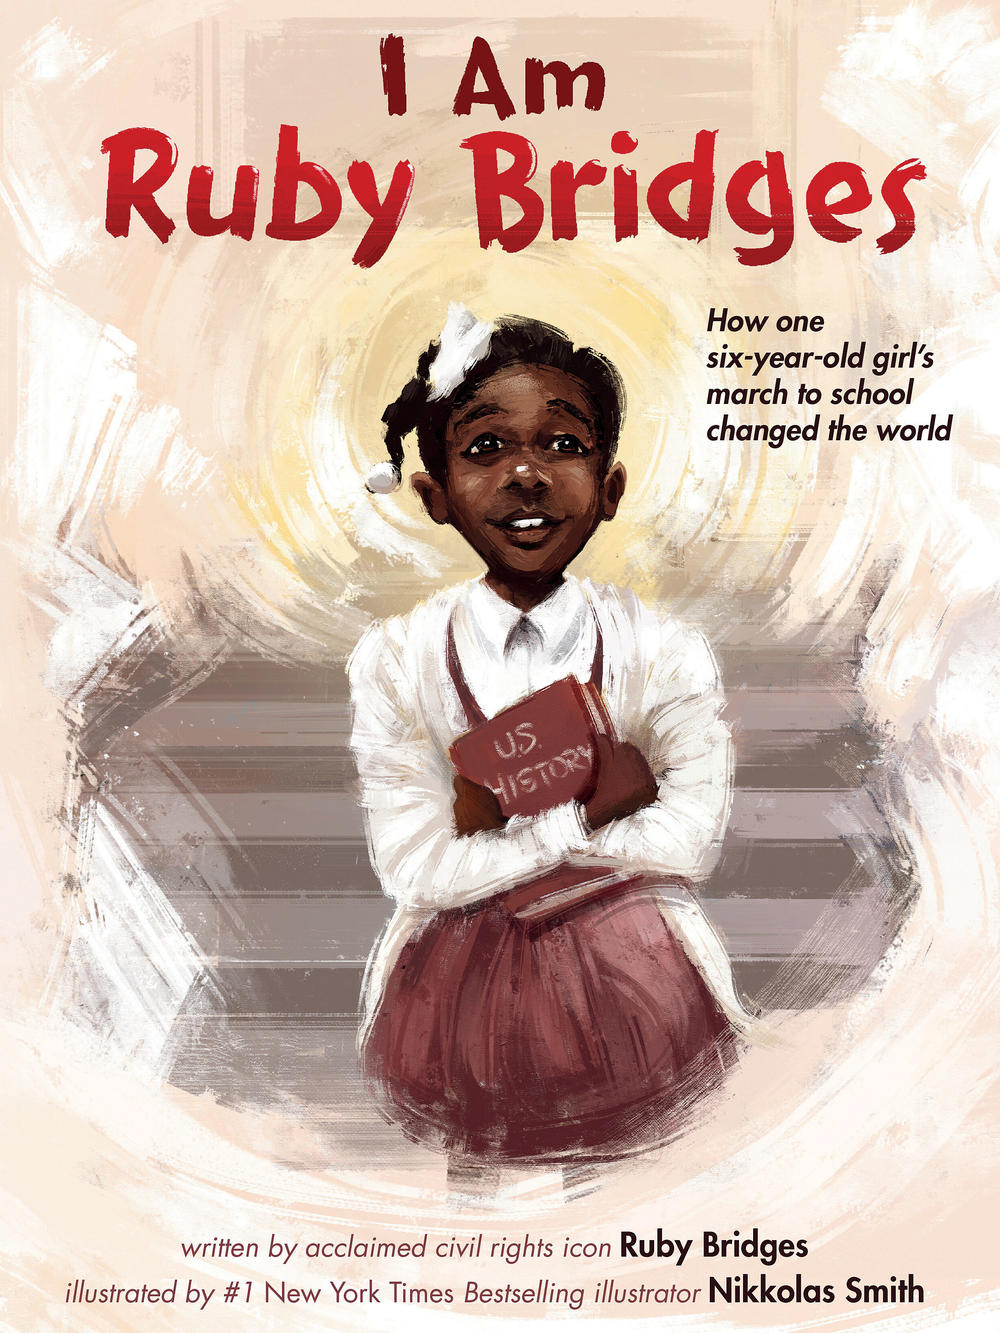 This is Bridges' newest book, with illustrations by Nikkolas Smith.